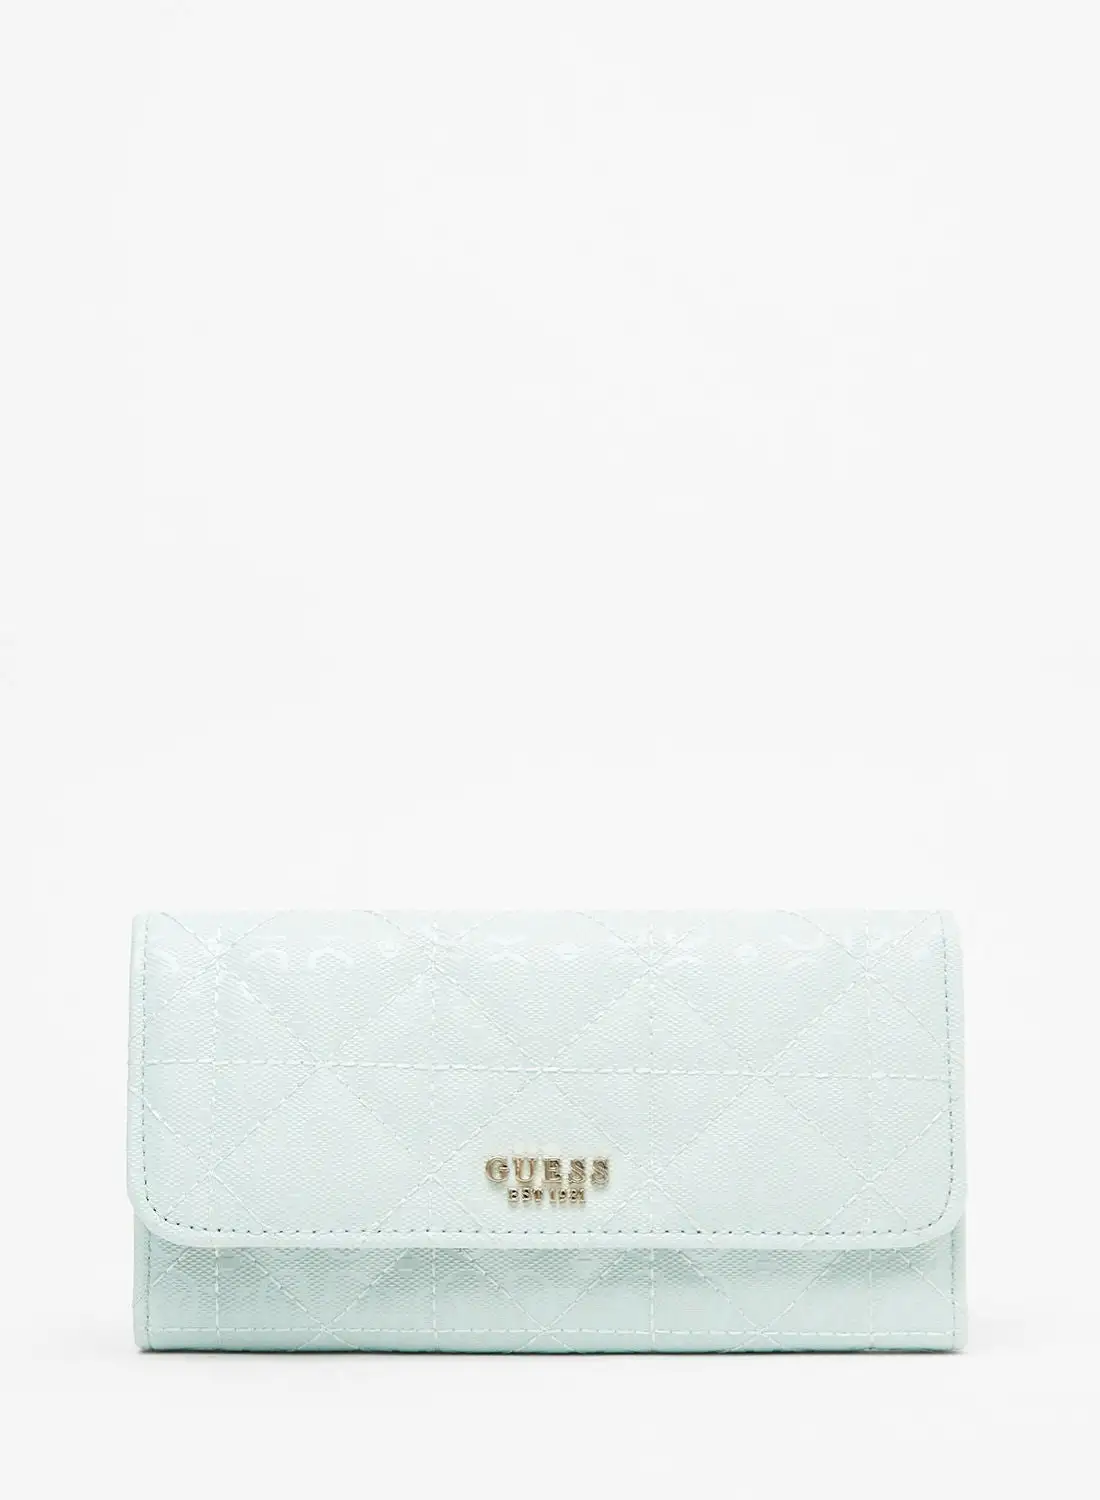 GUESS Malia Quilted Clutch